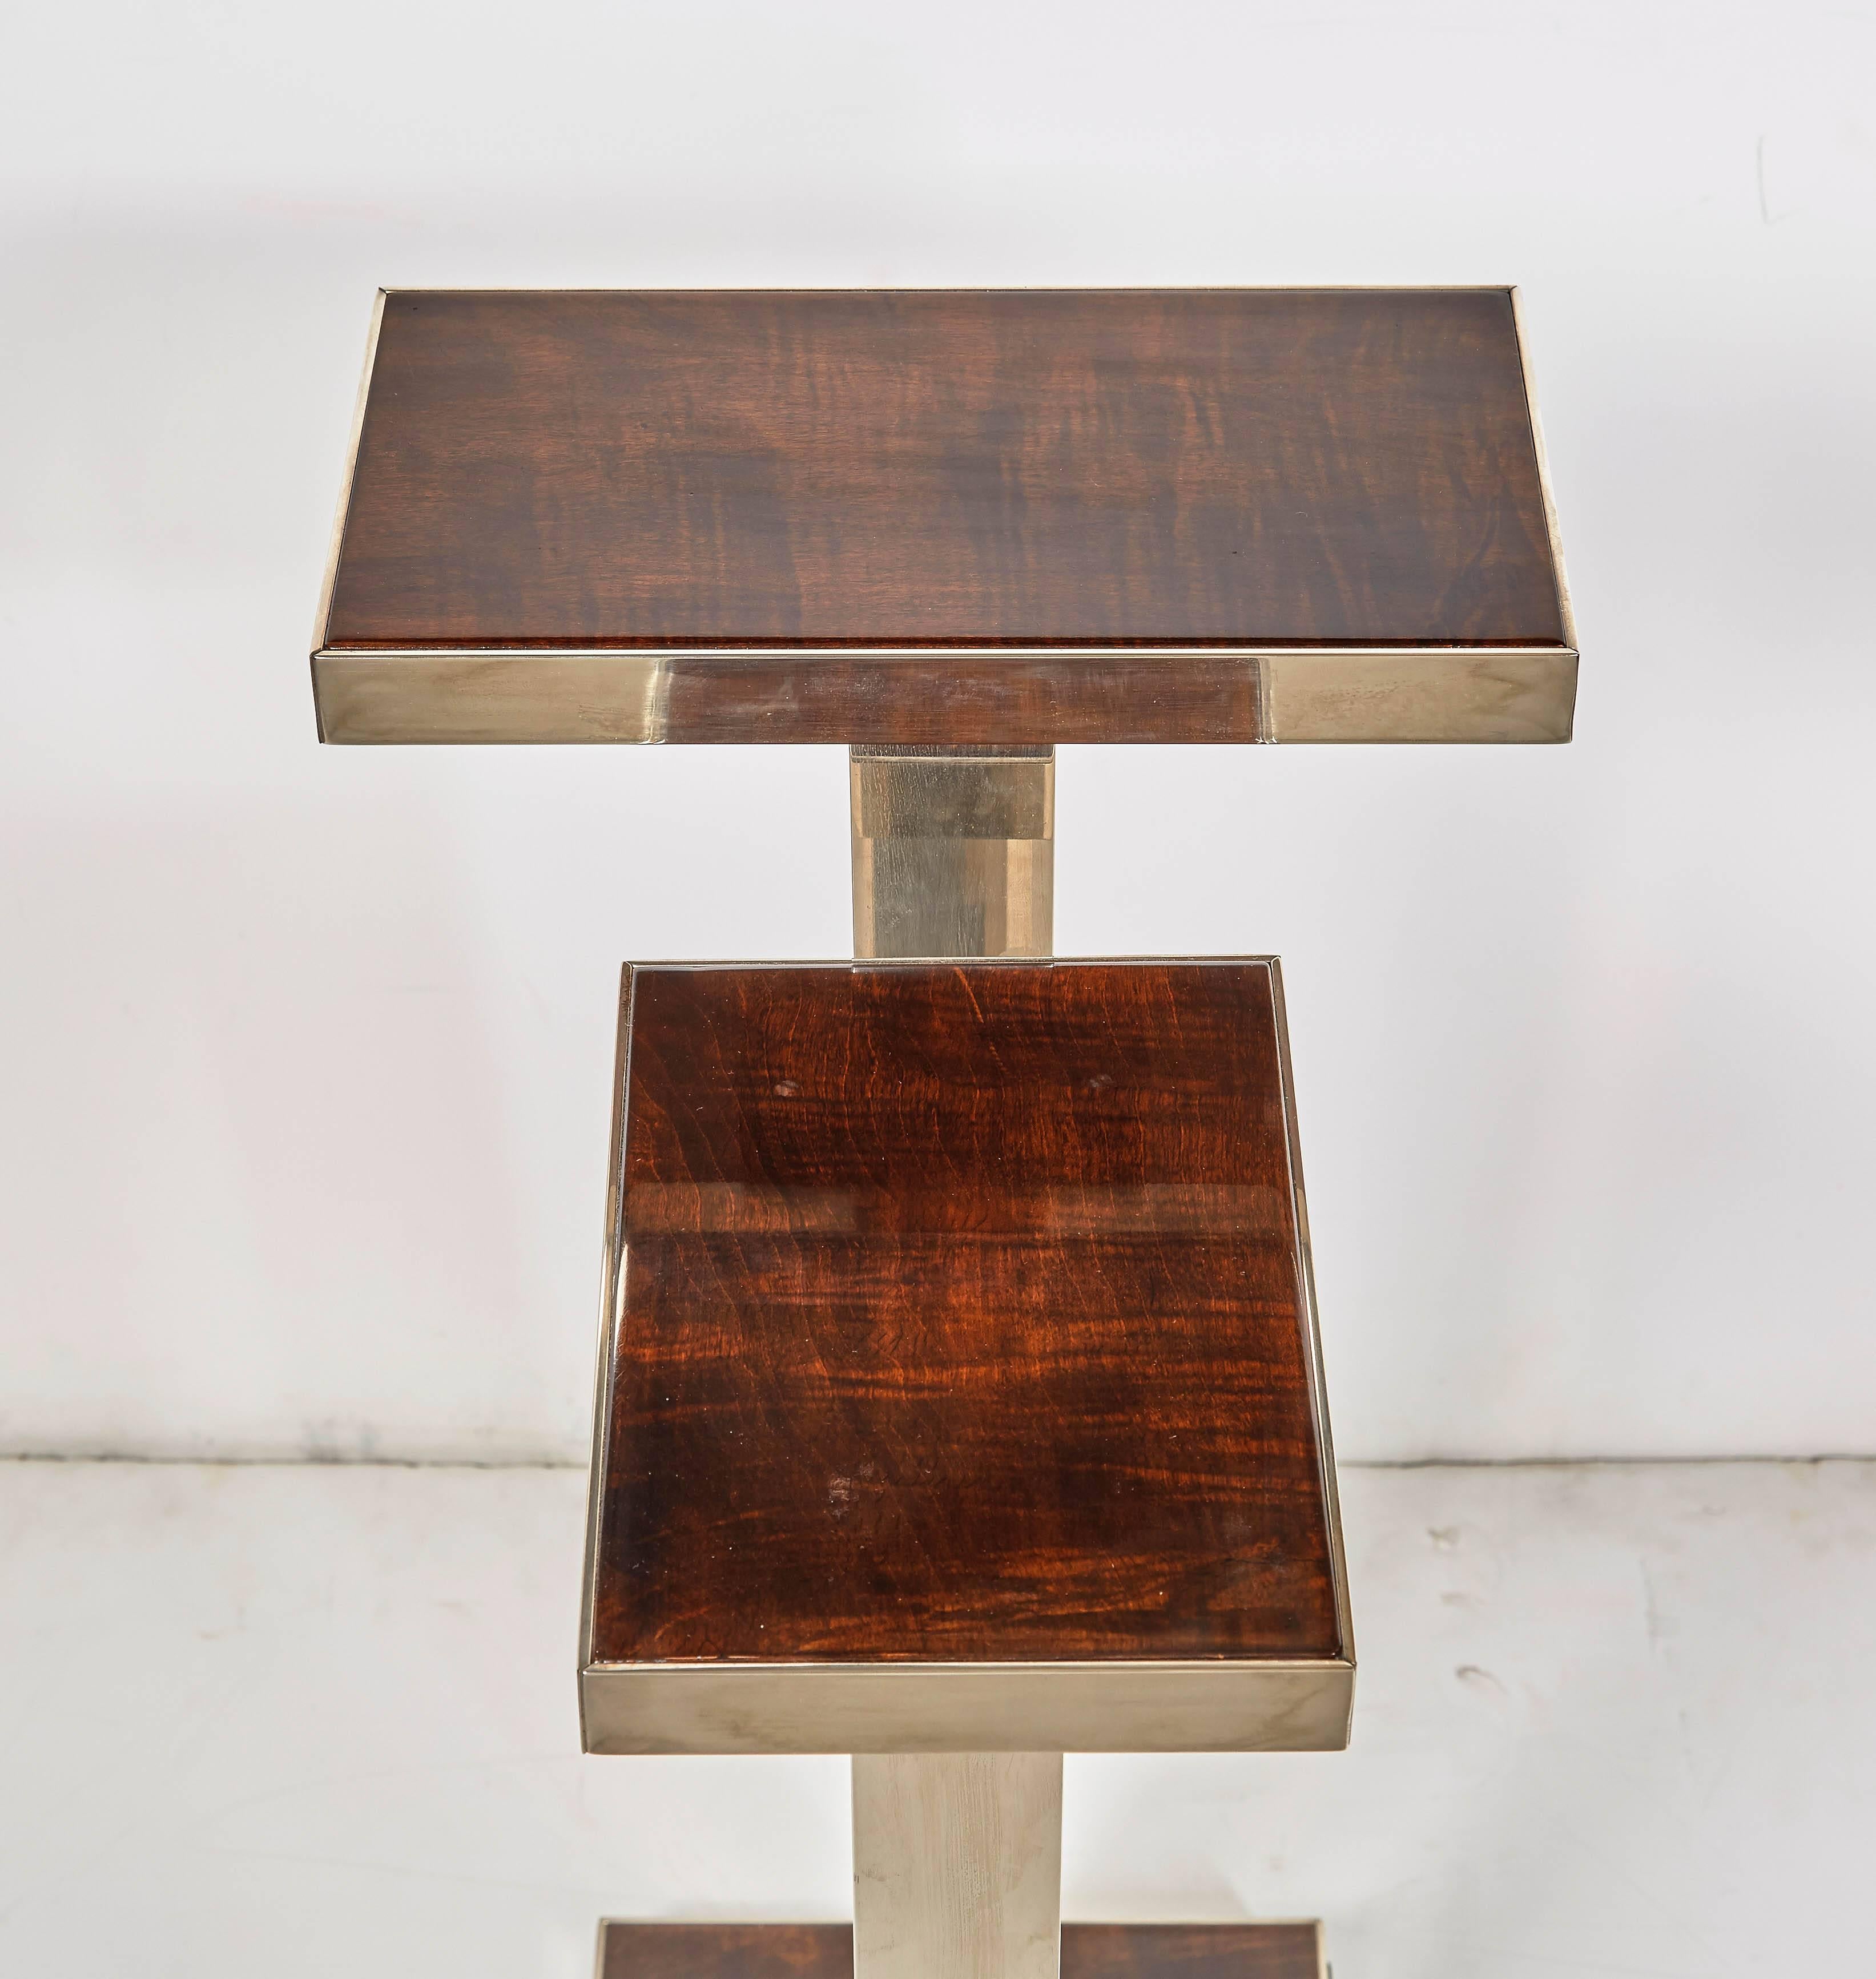 French Art Deco Wood & Nickeled Bronze Stepped Table Attributed to Andre Ducaroy 1